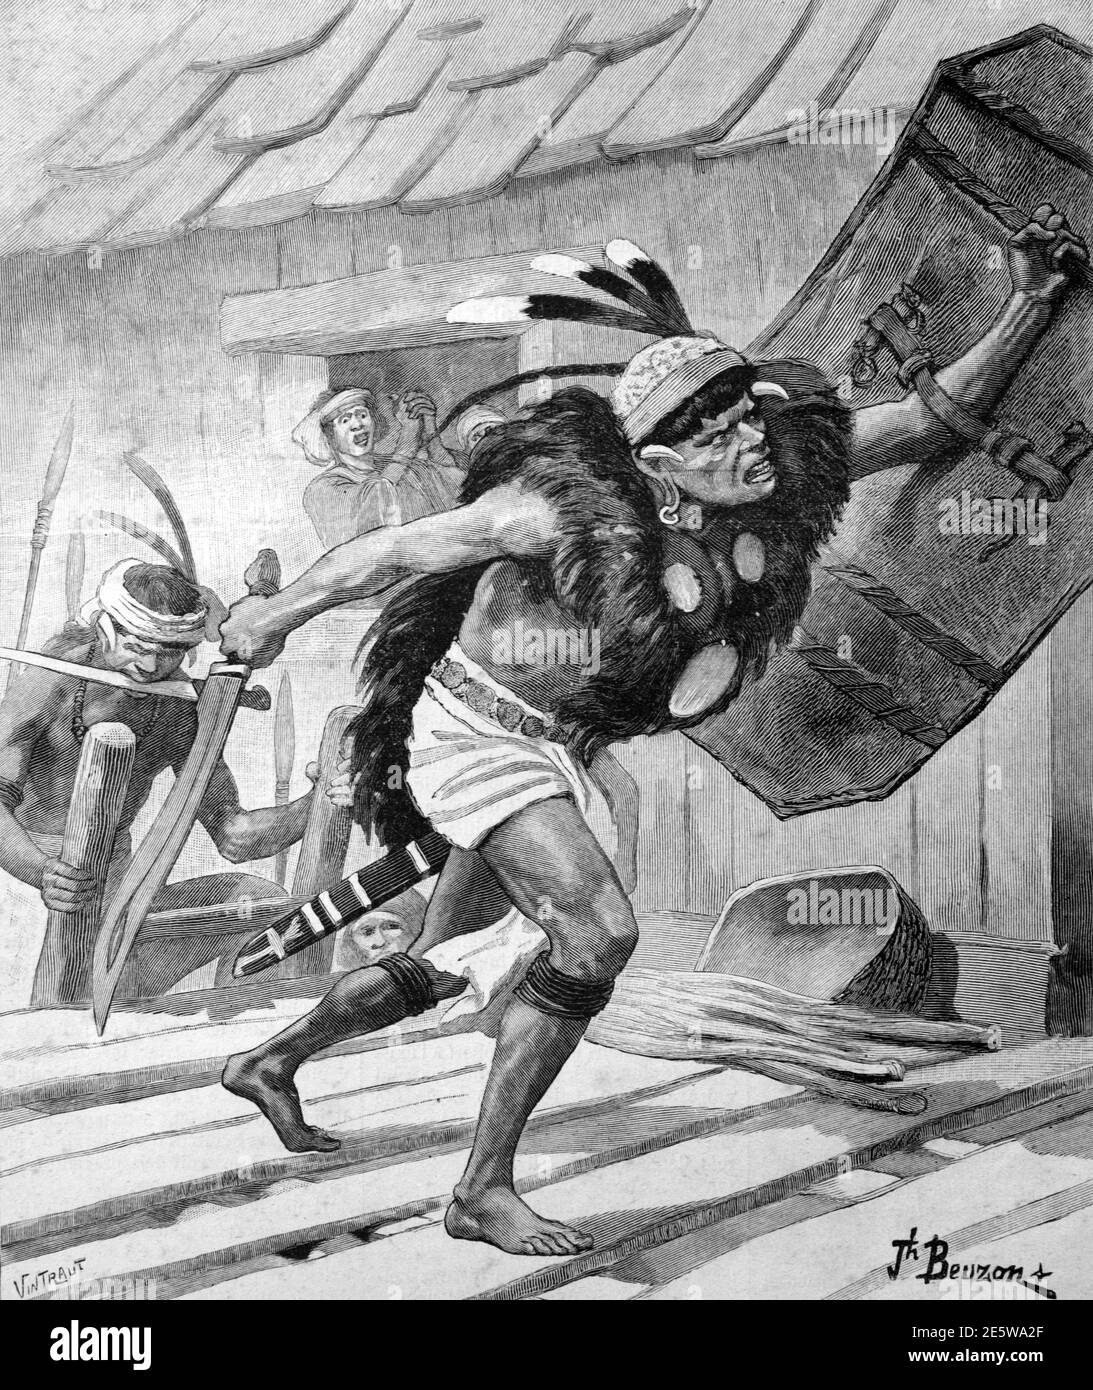 Head Hunting Dayaks or Dyaks Attacking Longhouse in Borneo 1903 Vintage Illustration or Engraving Stock Photo